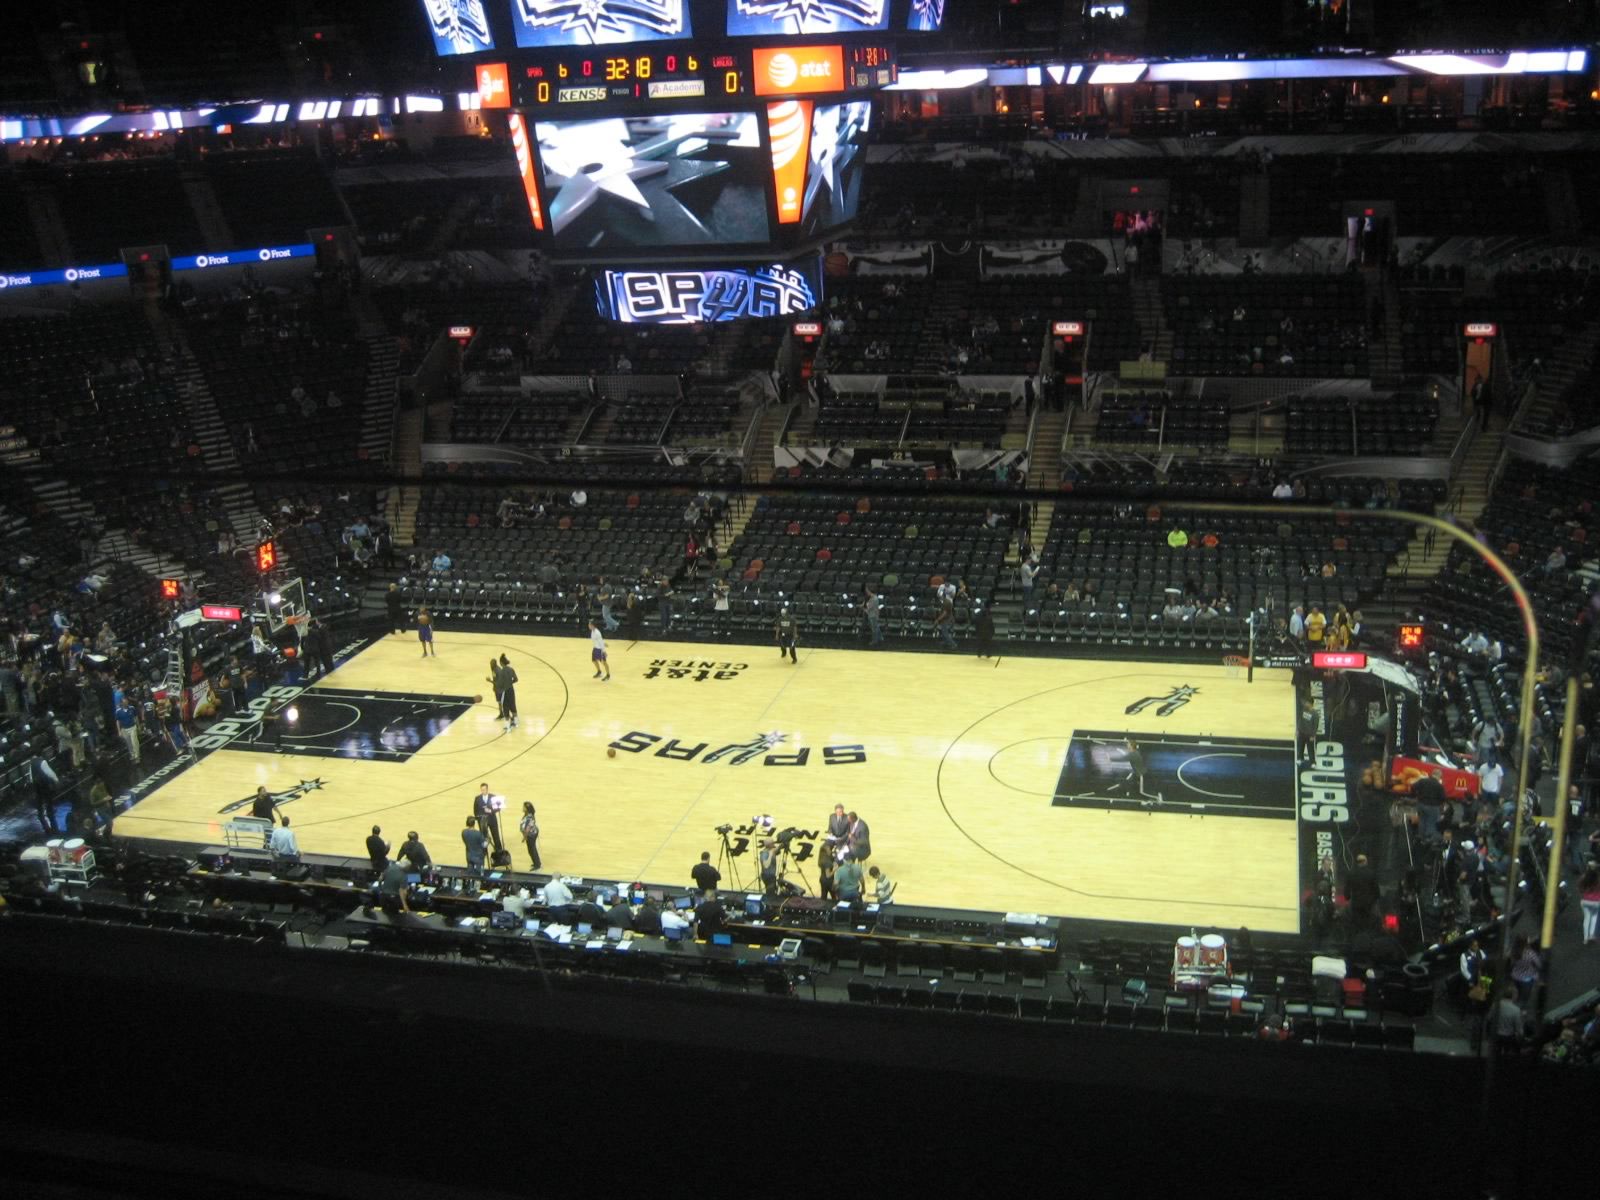 section 207, row 1 seat view  for basketball - at&t center